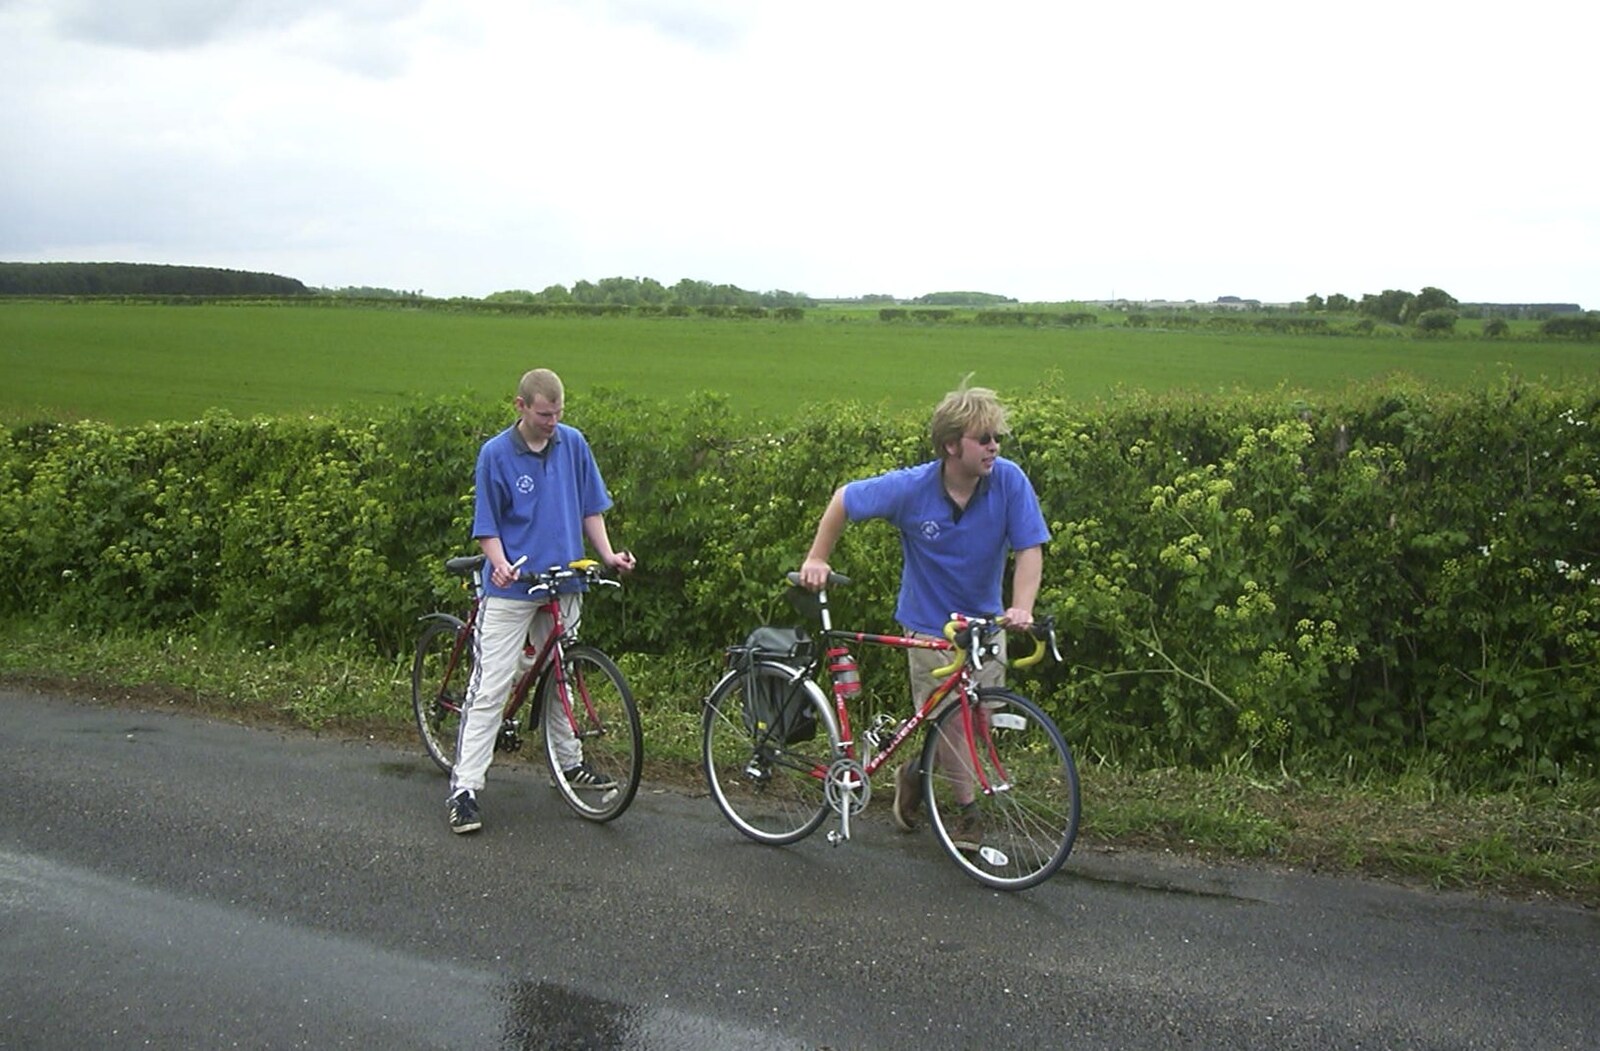 The BSCC Bike Ride Weekend, Kelling, Norfolk - 9th May 2003: Bill and Marc on a wet road